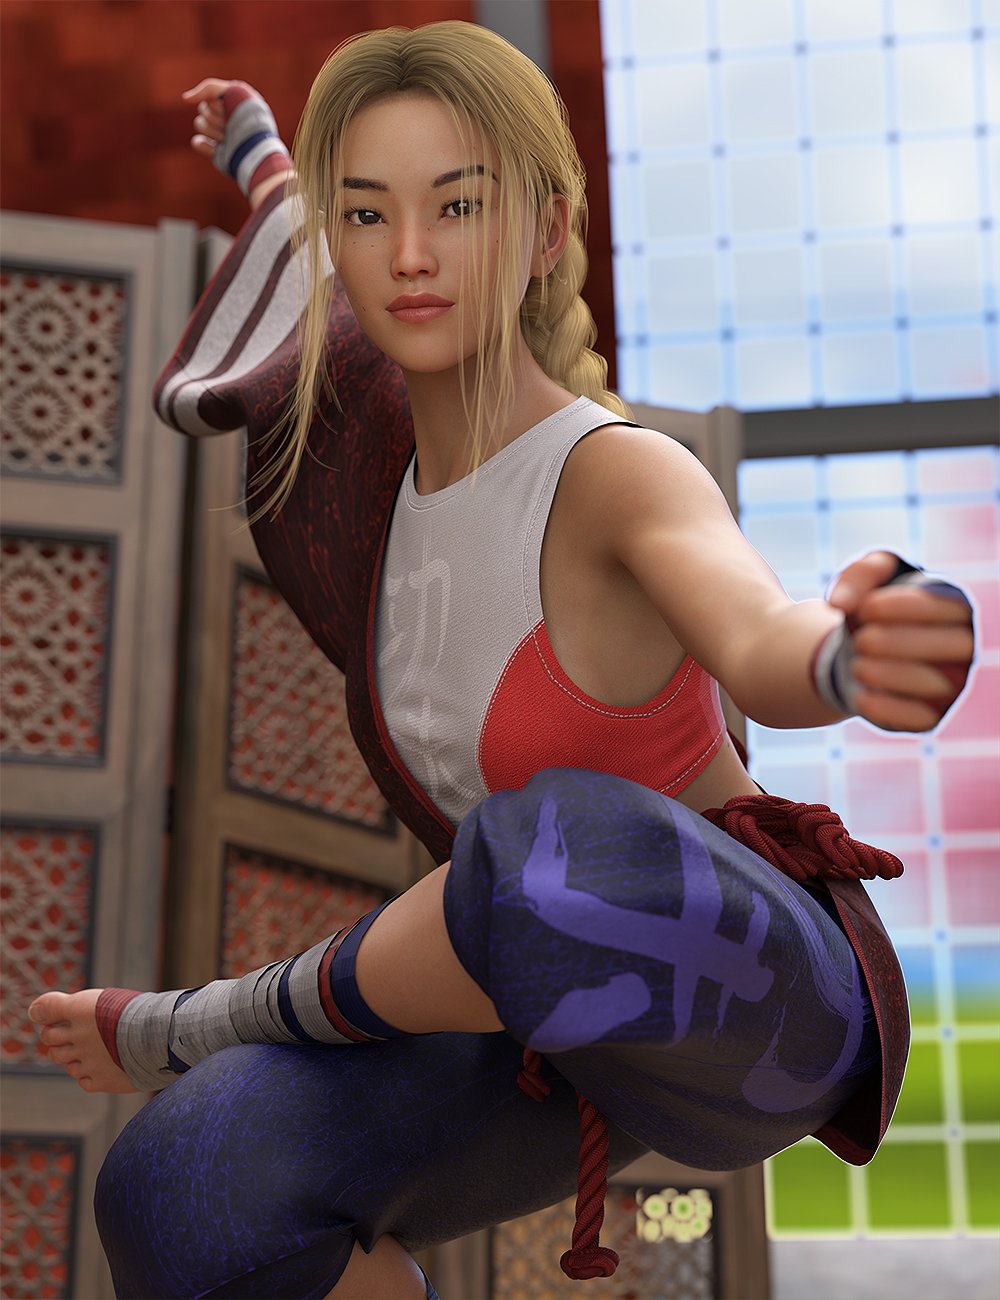 KungFu Fury Poses for Genesis 8 and 8.1 Females by: Val3dartbiuzpharb, 3D Models by Daz 3D